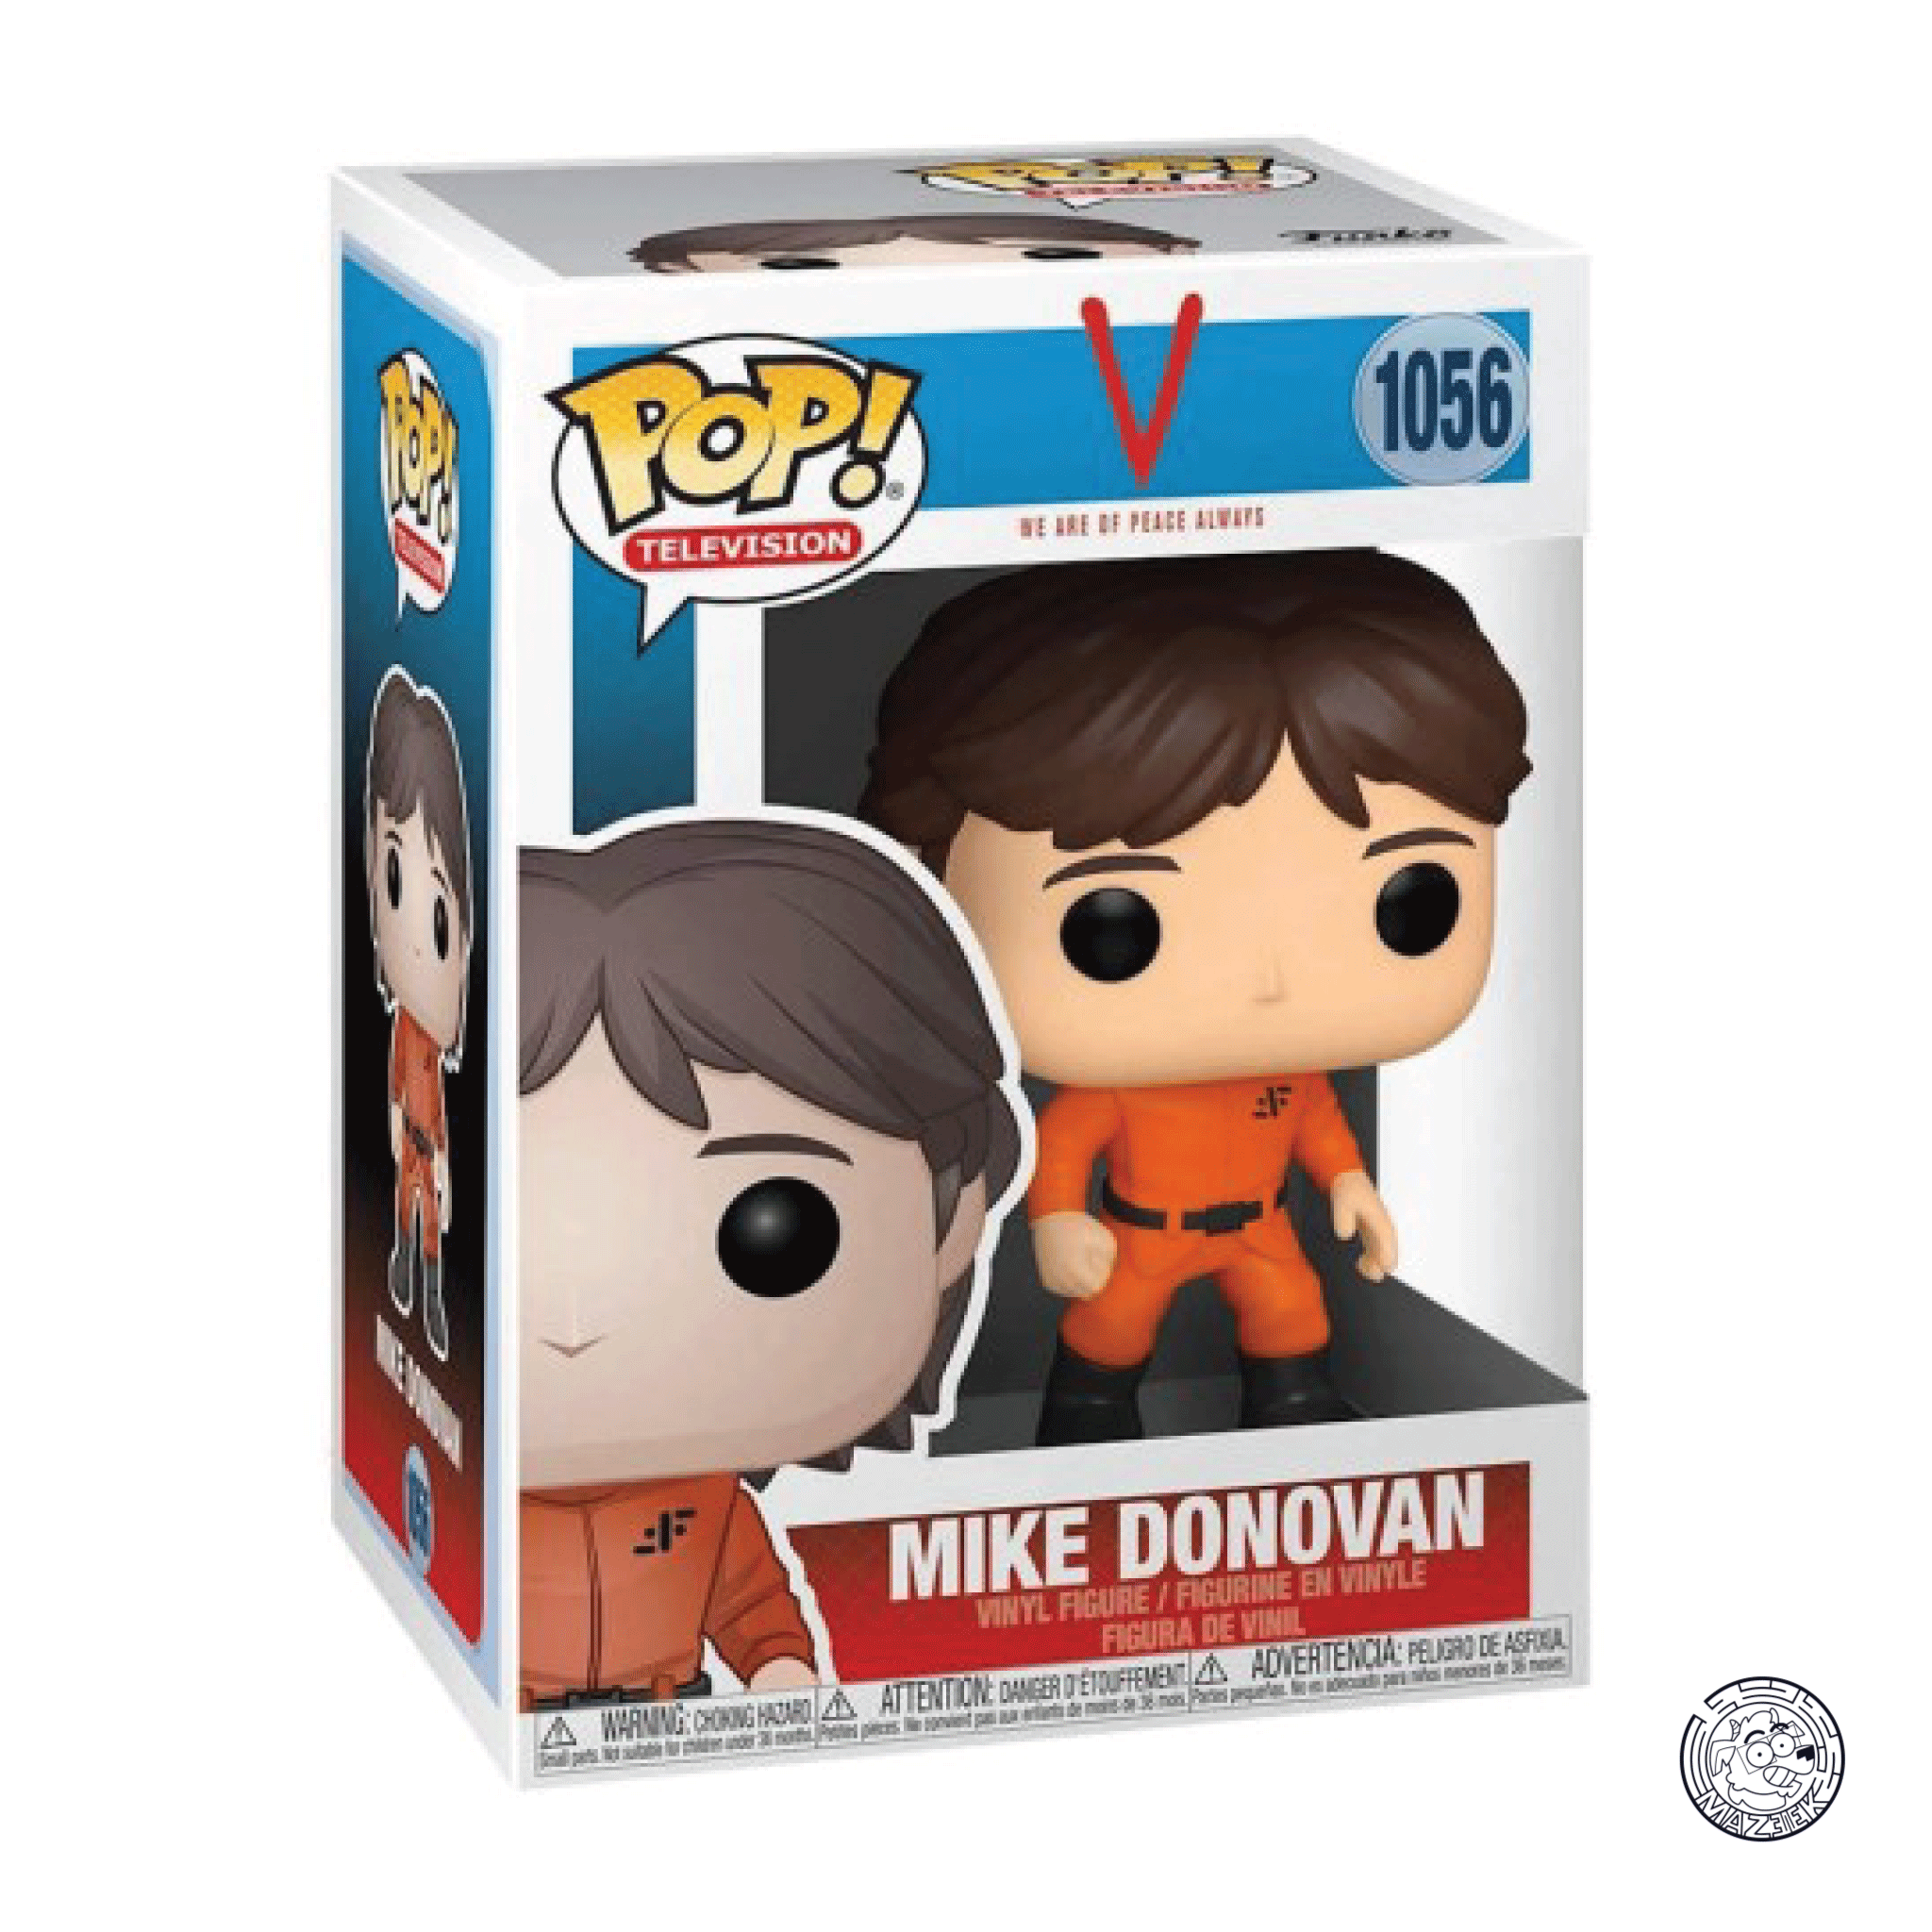 Funko POP! V We Are of Peace Always: Mike Donovan 1056